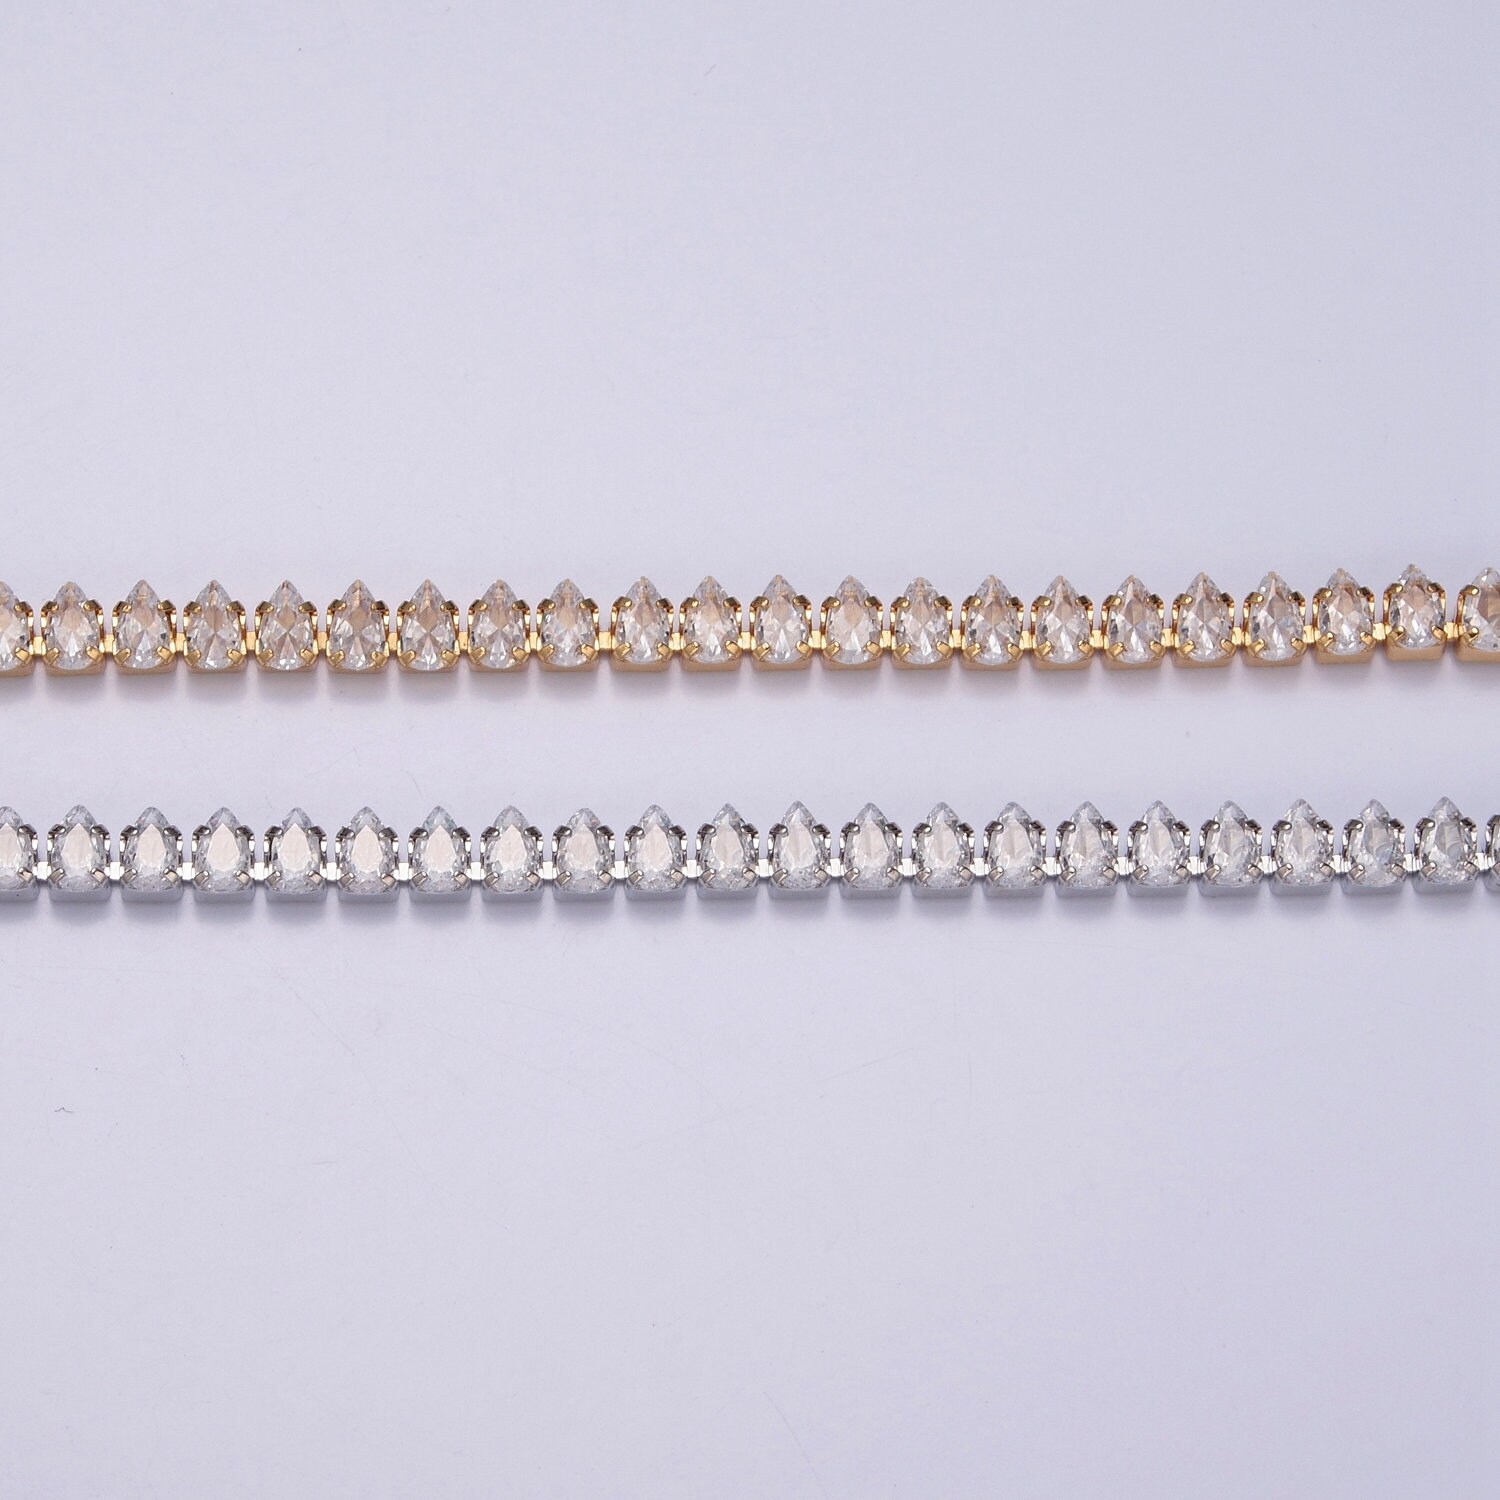 Silver Tennis Necklace or Bracelet Extender With AAAA Cubic Zirconia Round  Stones 3.1mm. Length 2. Please Measure for Fit Non Refundable -  Hong  Kong